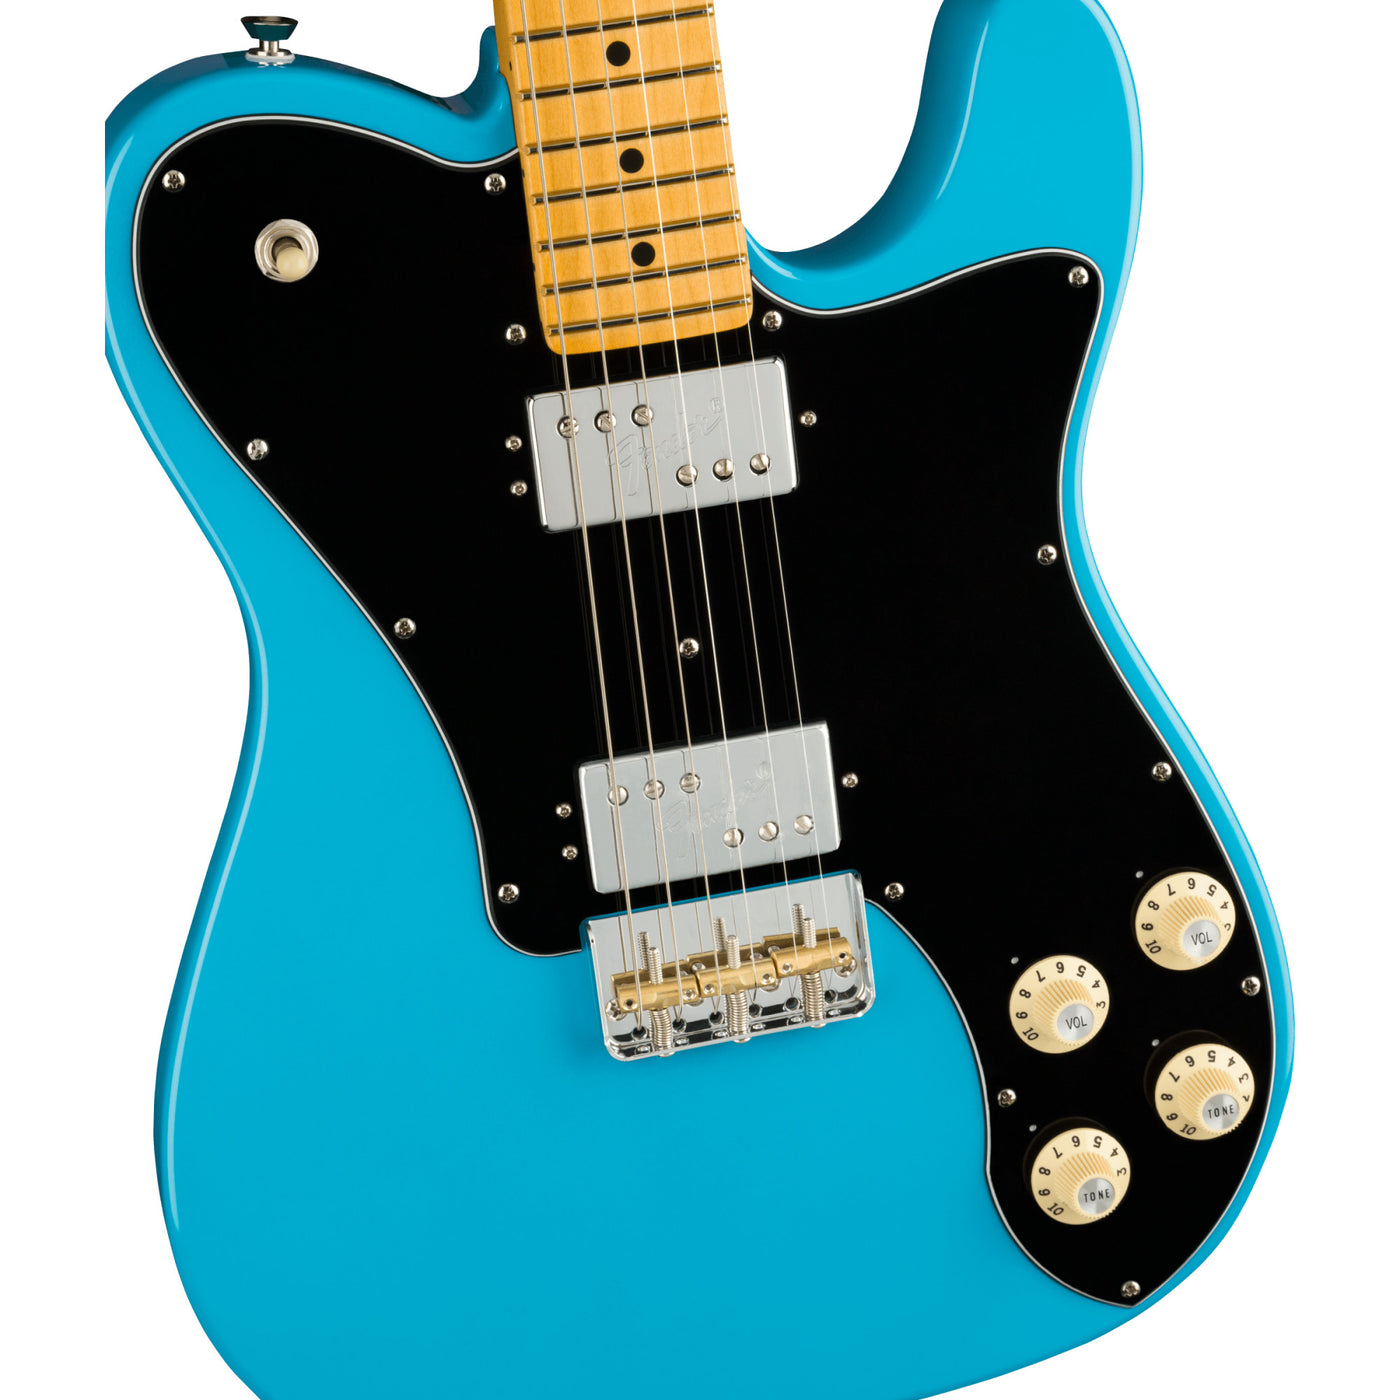 Fender American Professional ll Telecaster Deluxe Electric Guitar, Miami Blue (0113962719)